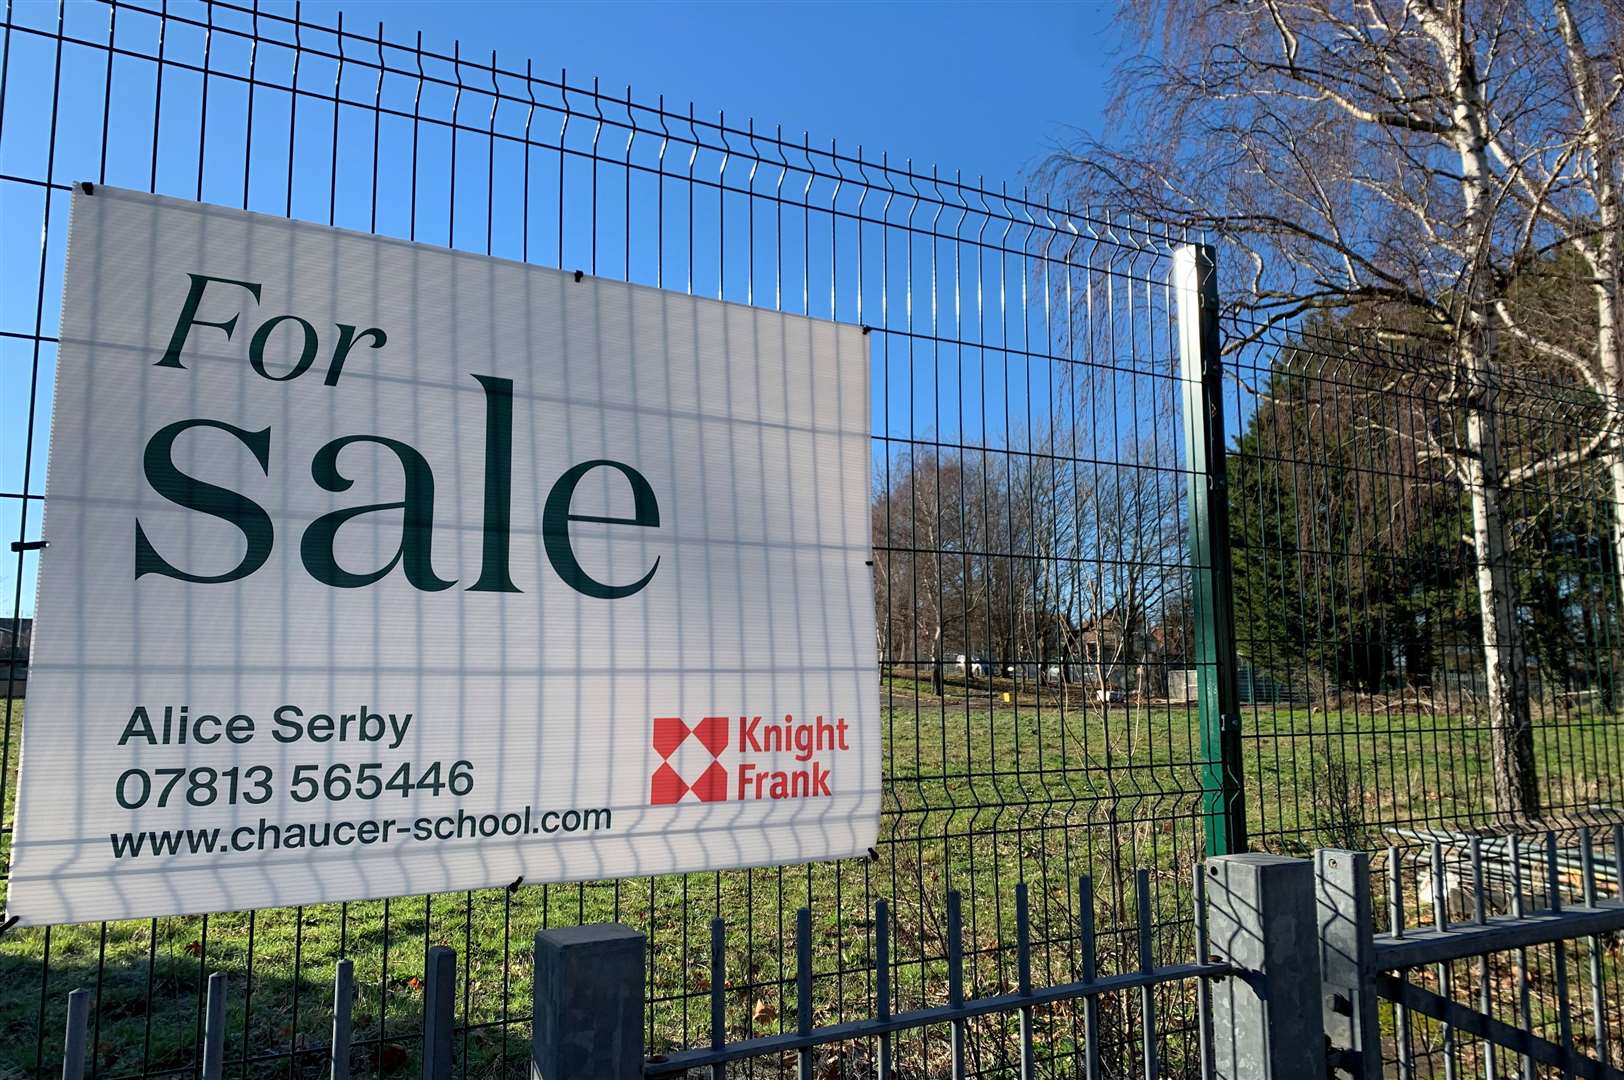 Land which was part of the former Chaucer School in Spring Lane, Canterbury, is on the market